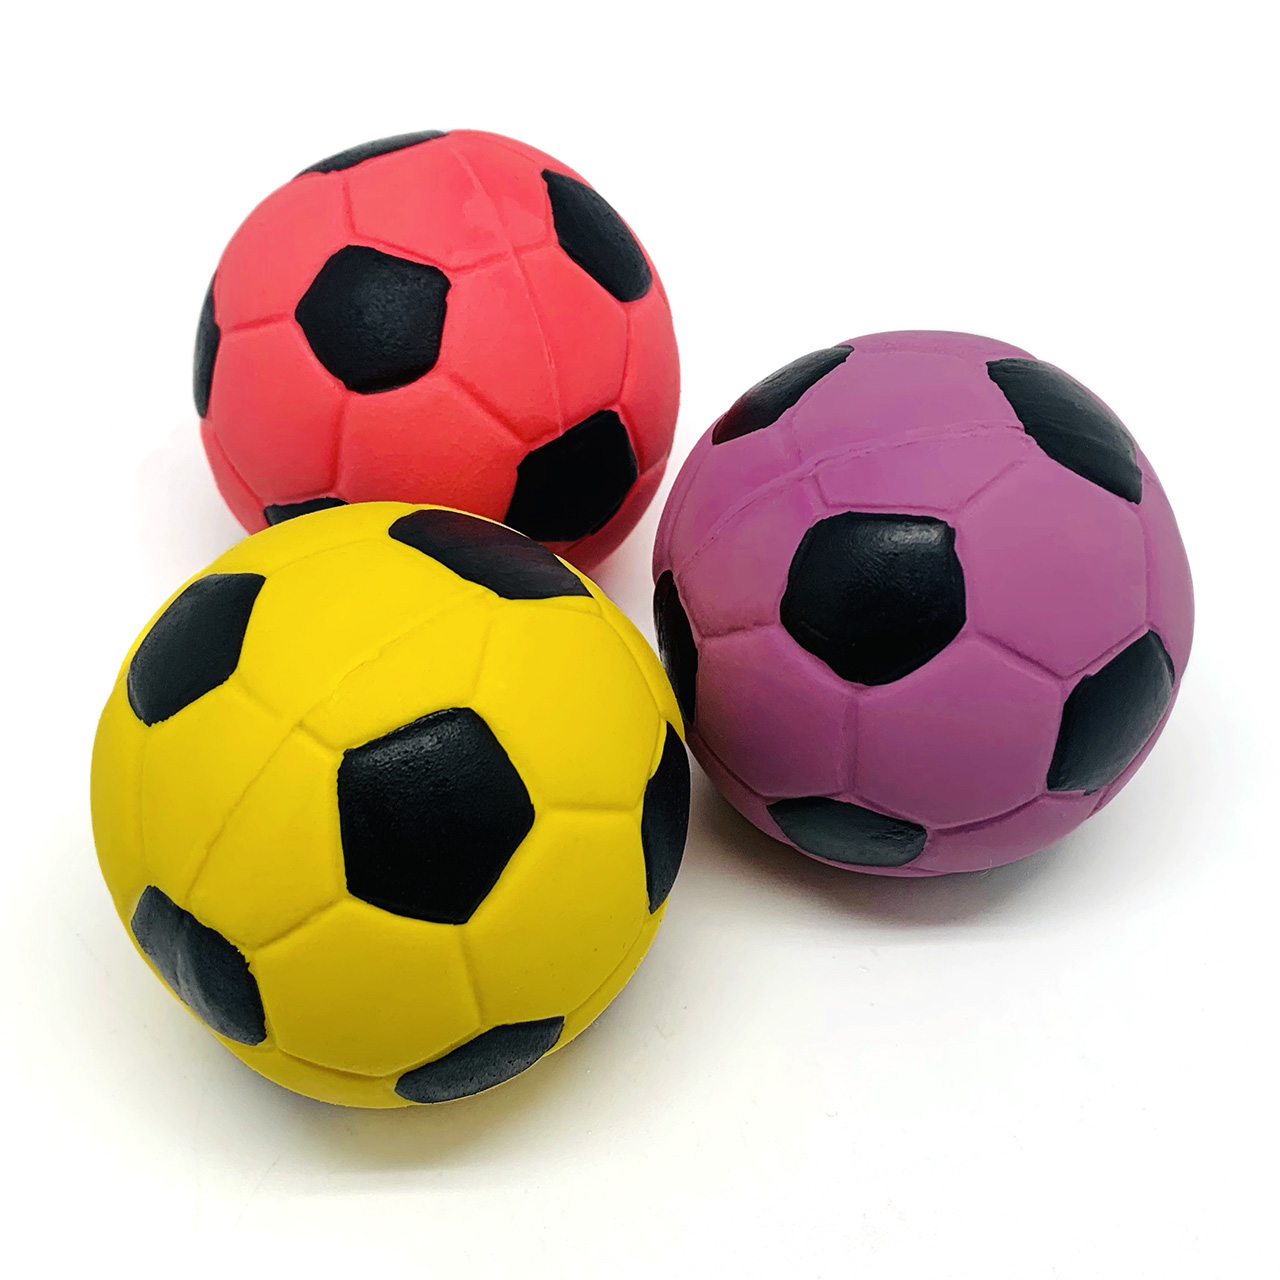 Chiwava 3 Pack 2.7 Inch Squeaky Latex Rubber Dog Toy Balls